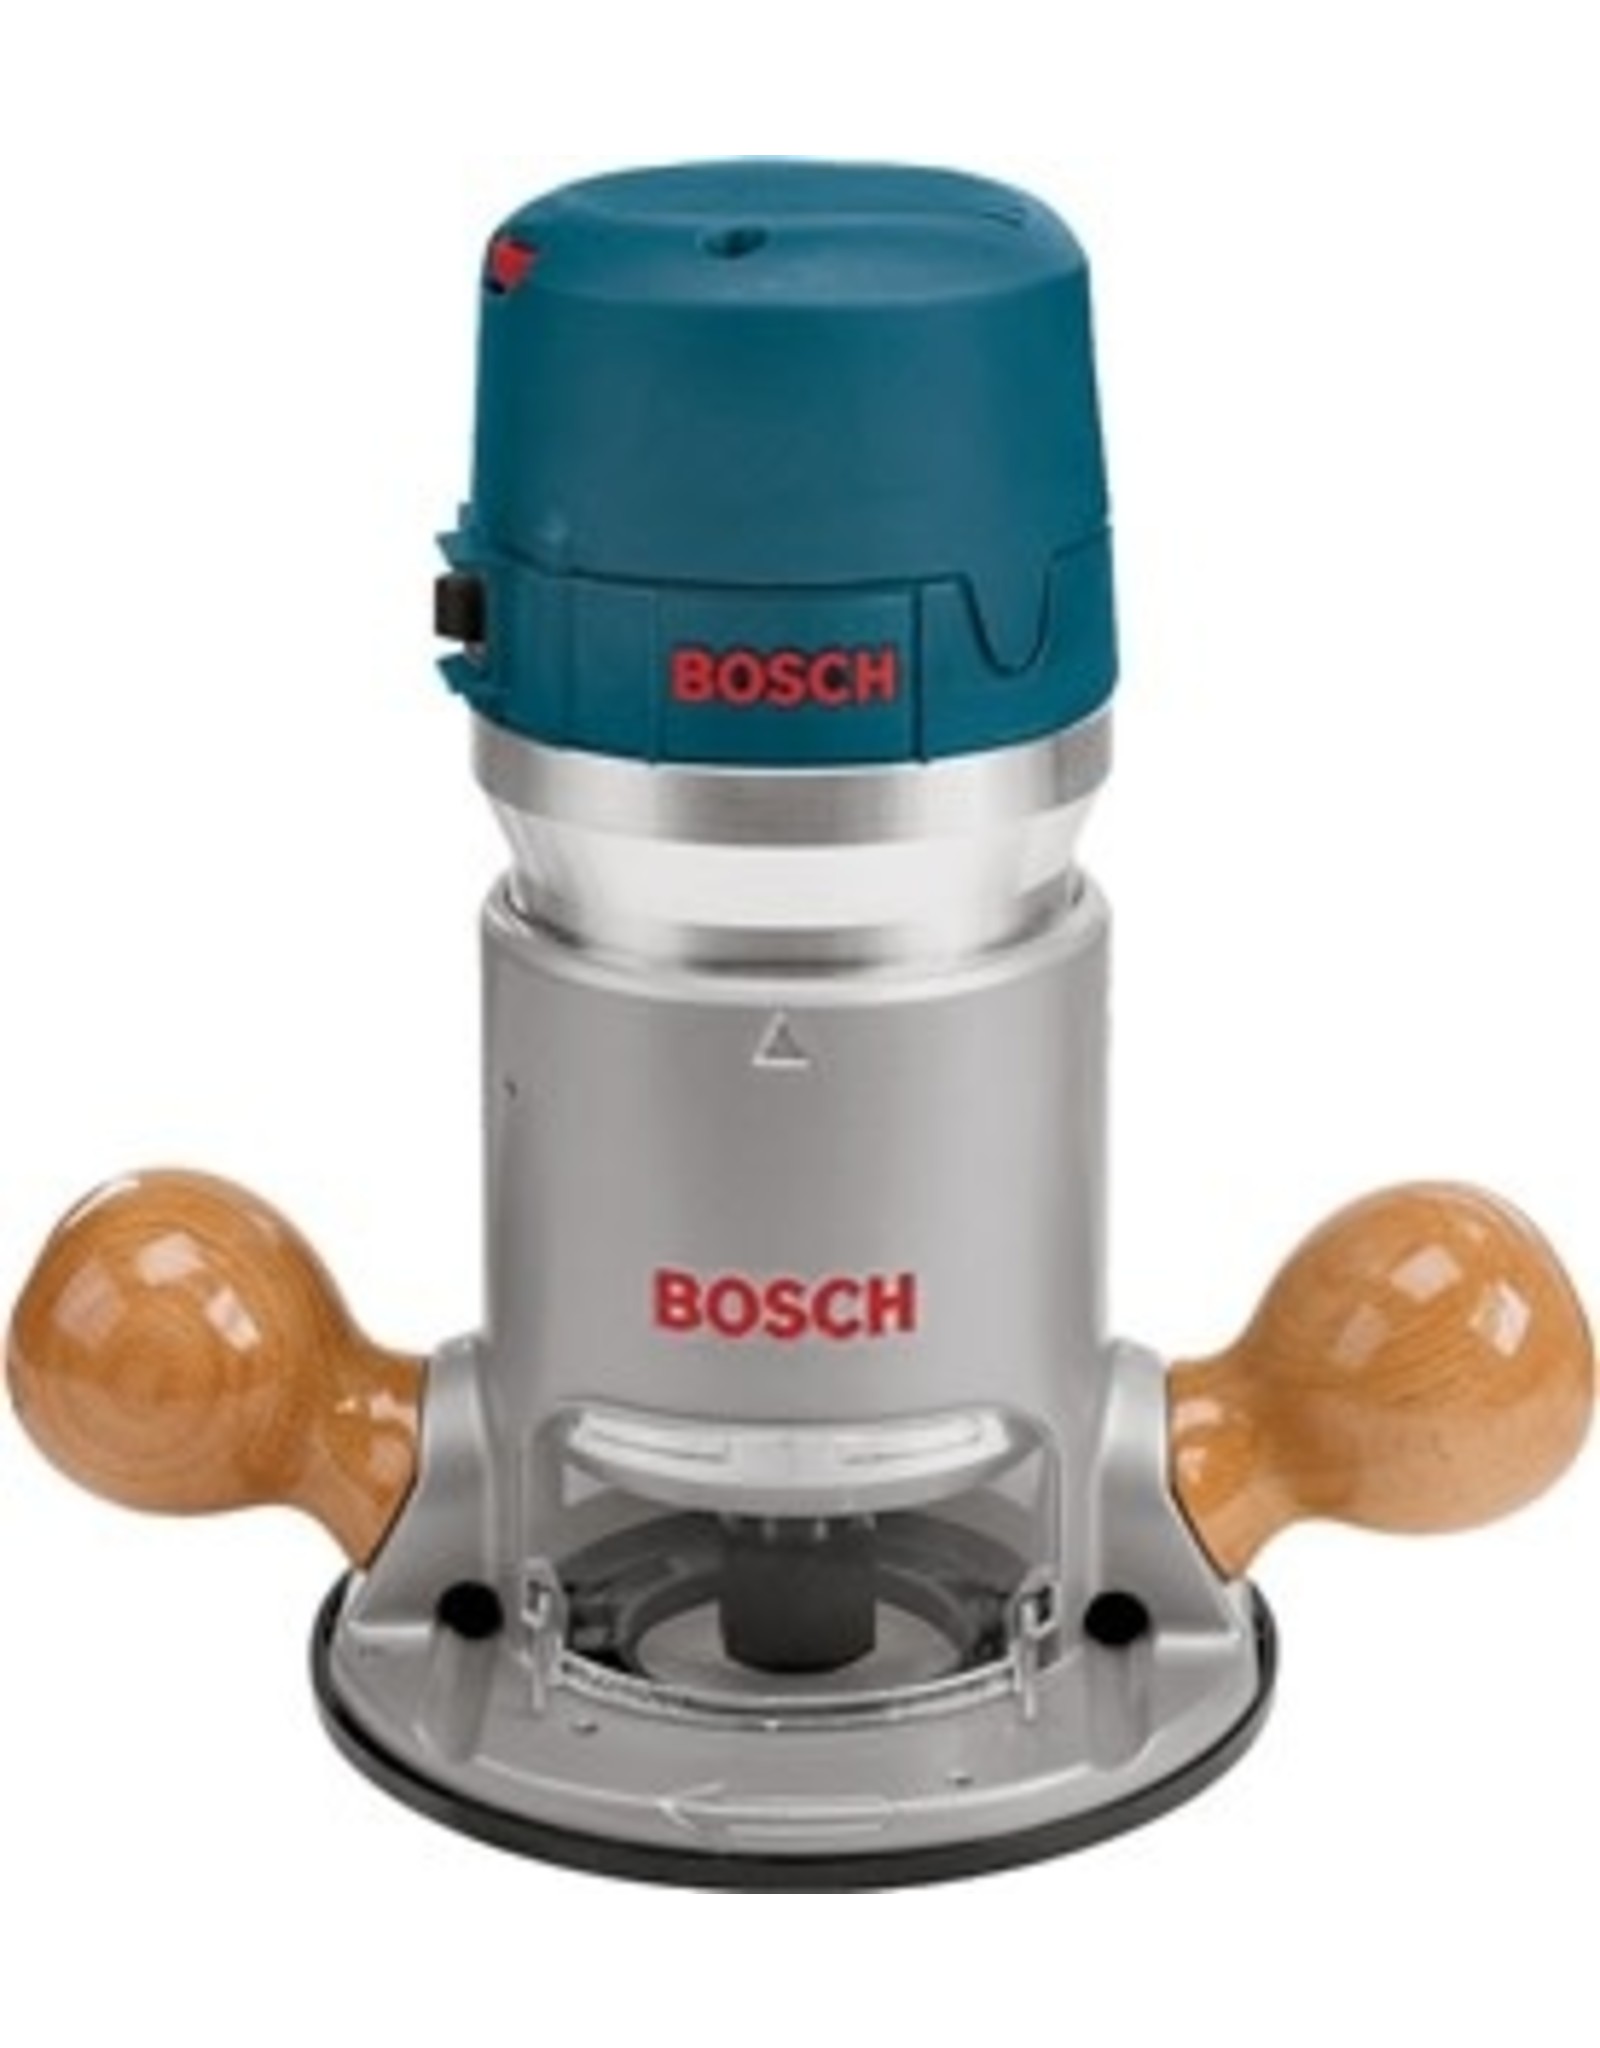 Bosch Bosch 1617EVS Router, 120 V, 12 A, 8000 to 25,000 rpm No Load*